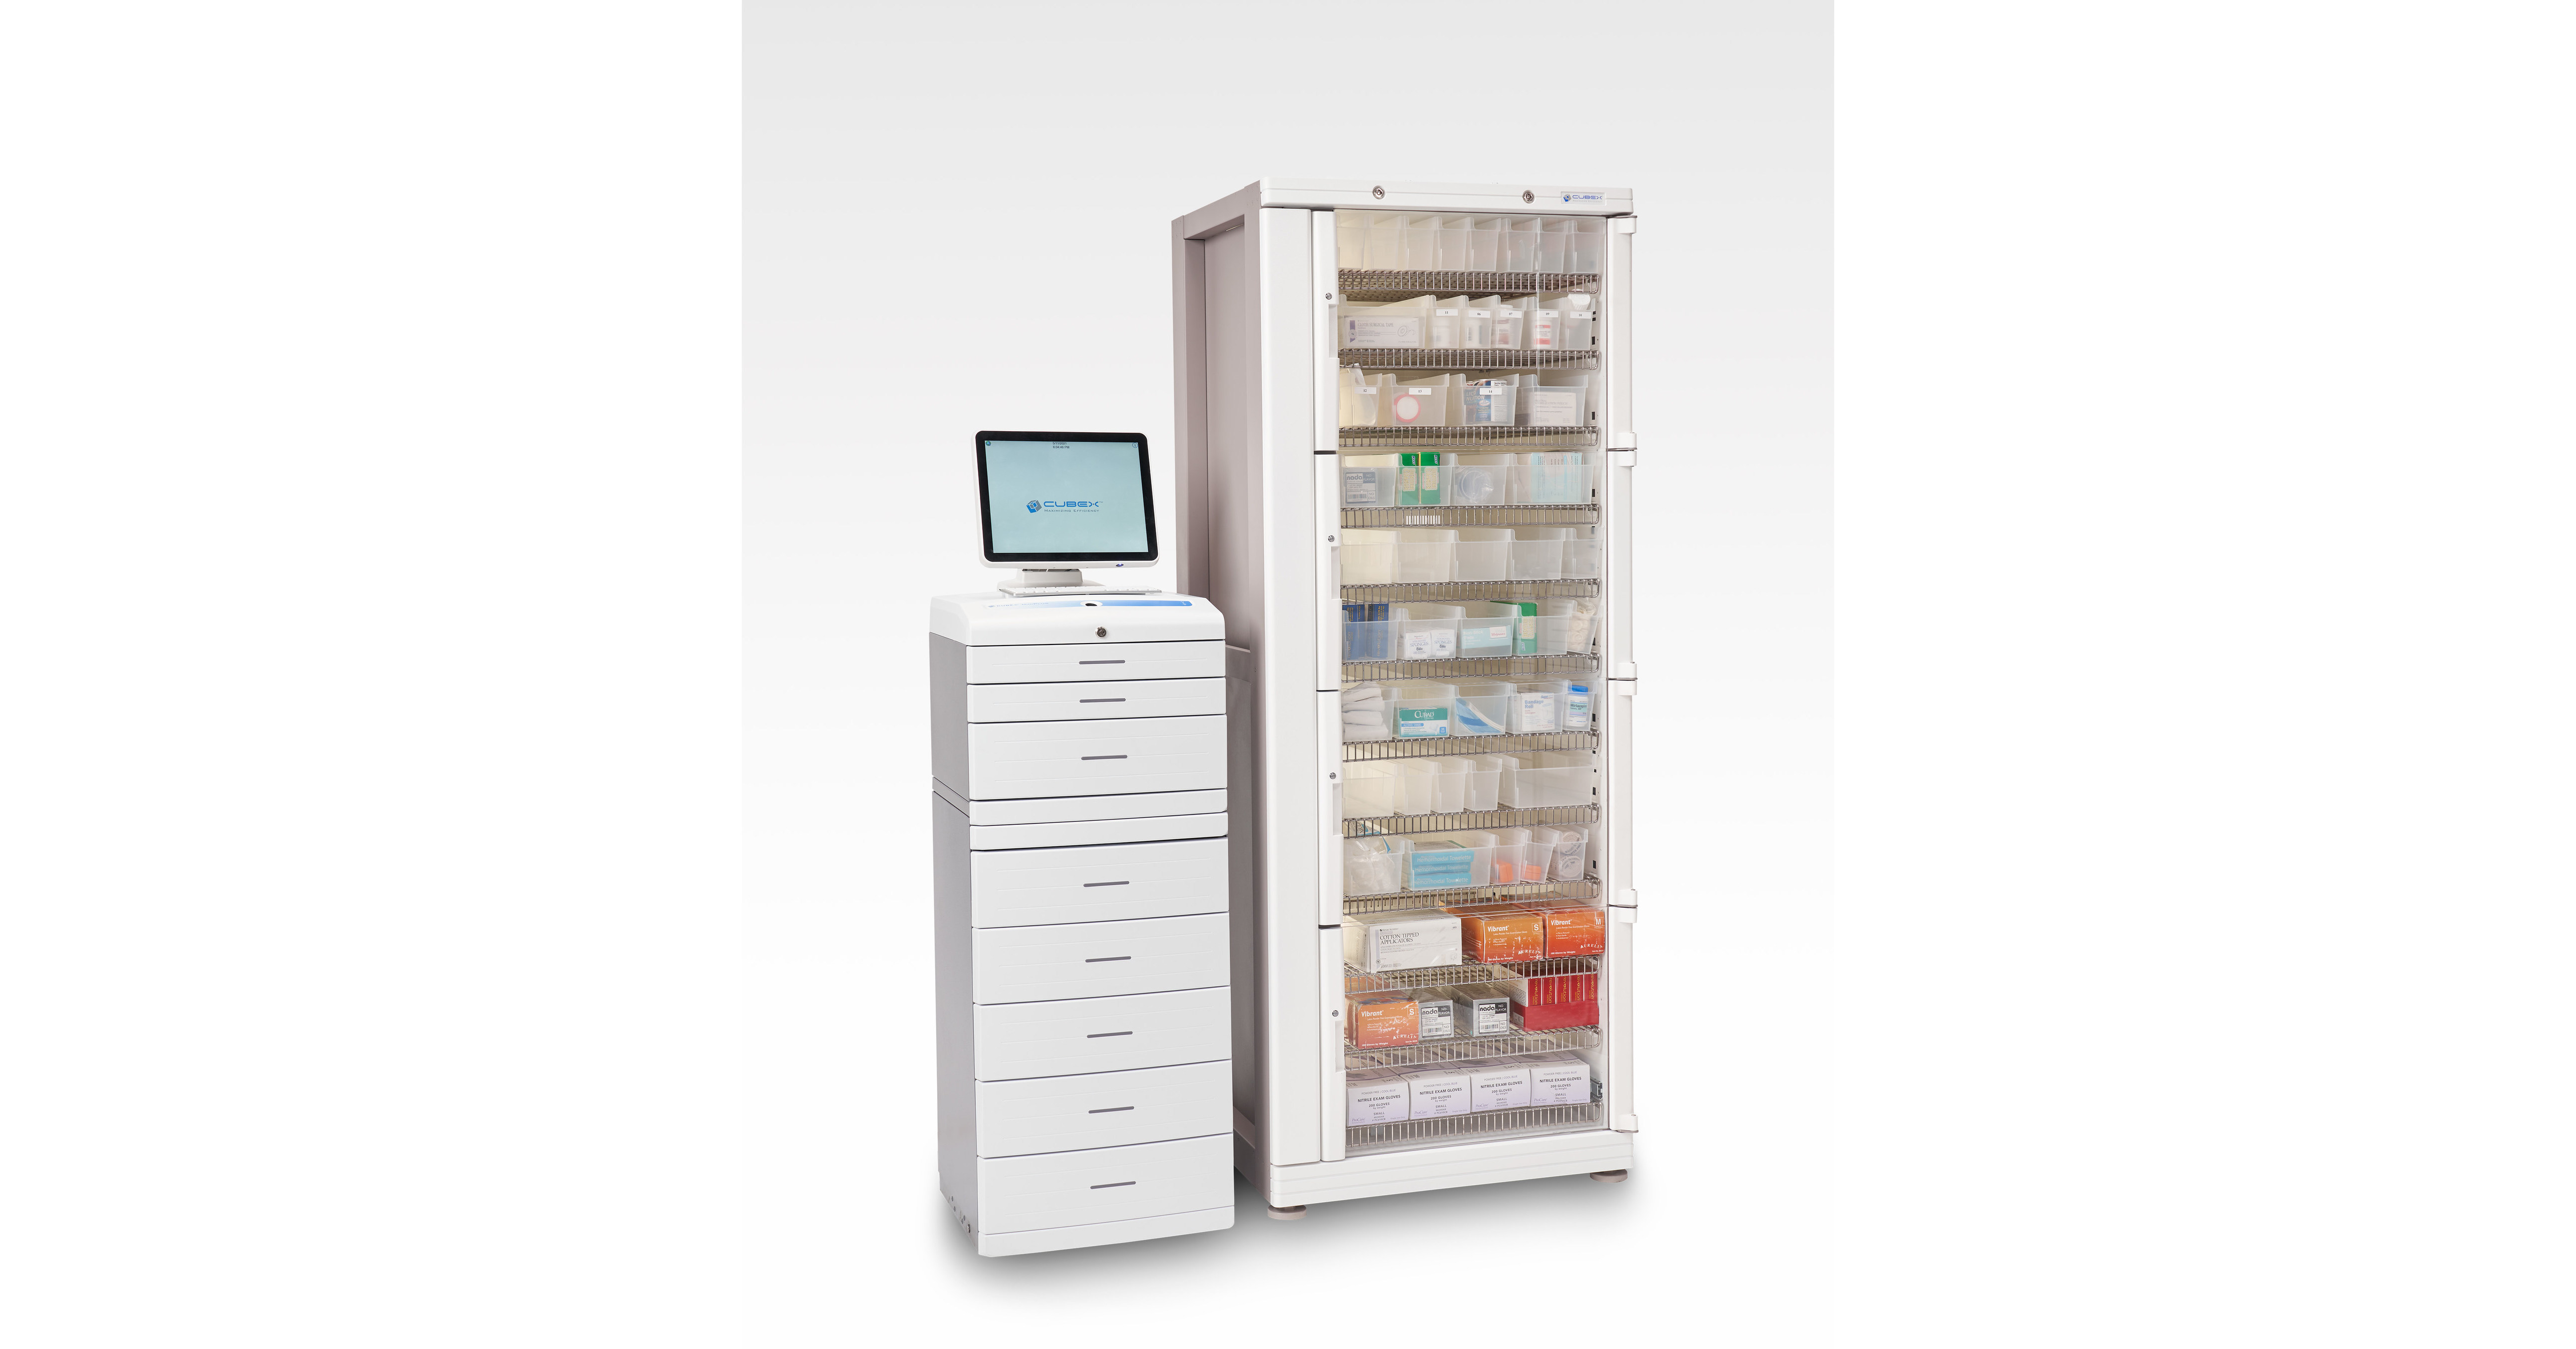 CUBEX LLC introduces CUBEX® Flex Bundle, a complete solution for controlled substance and pharmacy storage in veterinary medicine